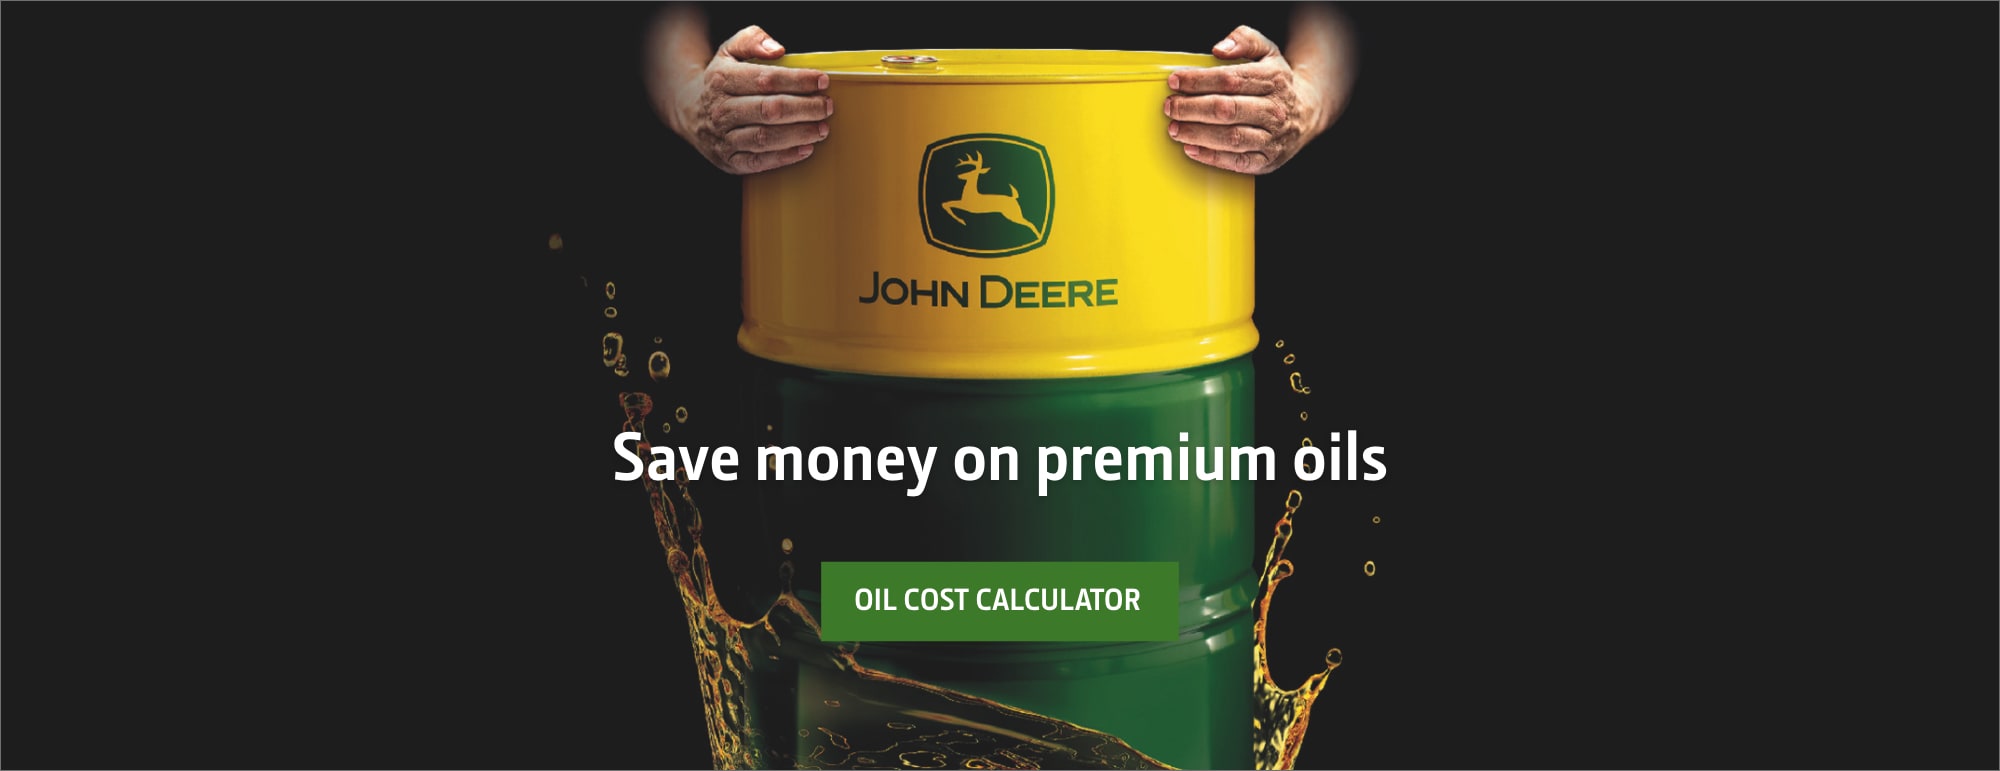 Save money on premium oils with our oil cost calculator